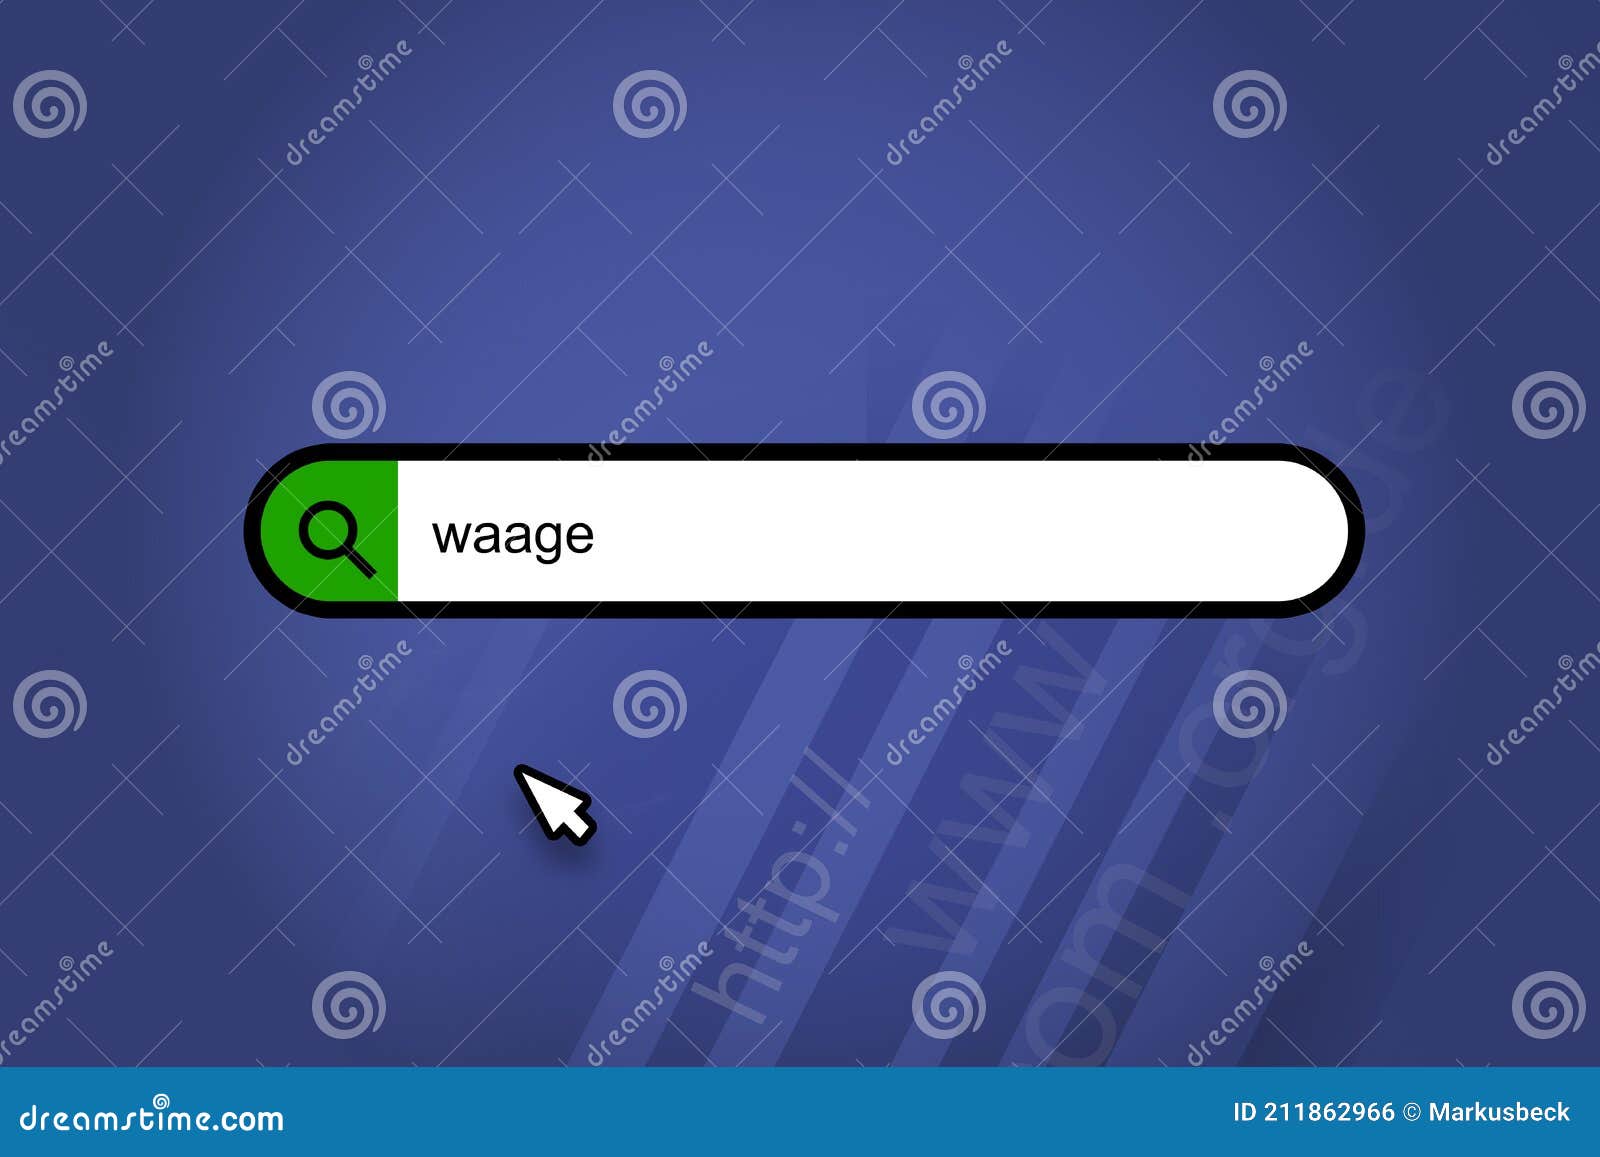 waage - search engine, search bar with blue background